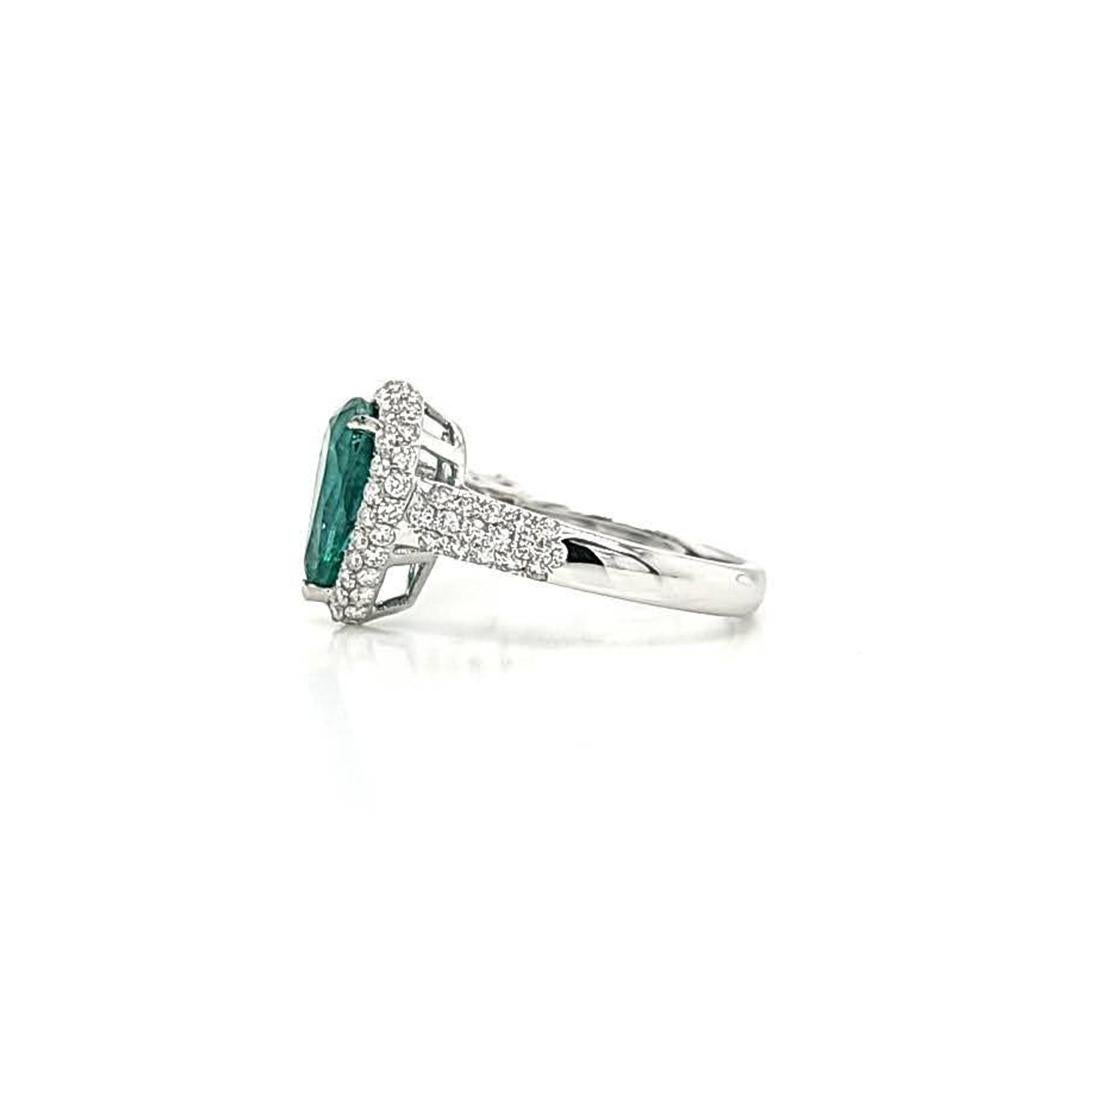 2.67 CT Zambian Emerald & 1.10 CT Diamonds in 14K White Gold Engagement Ring For Sale 3